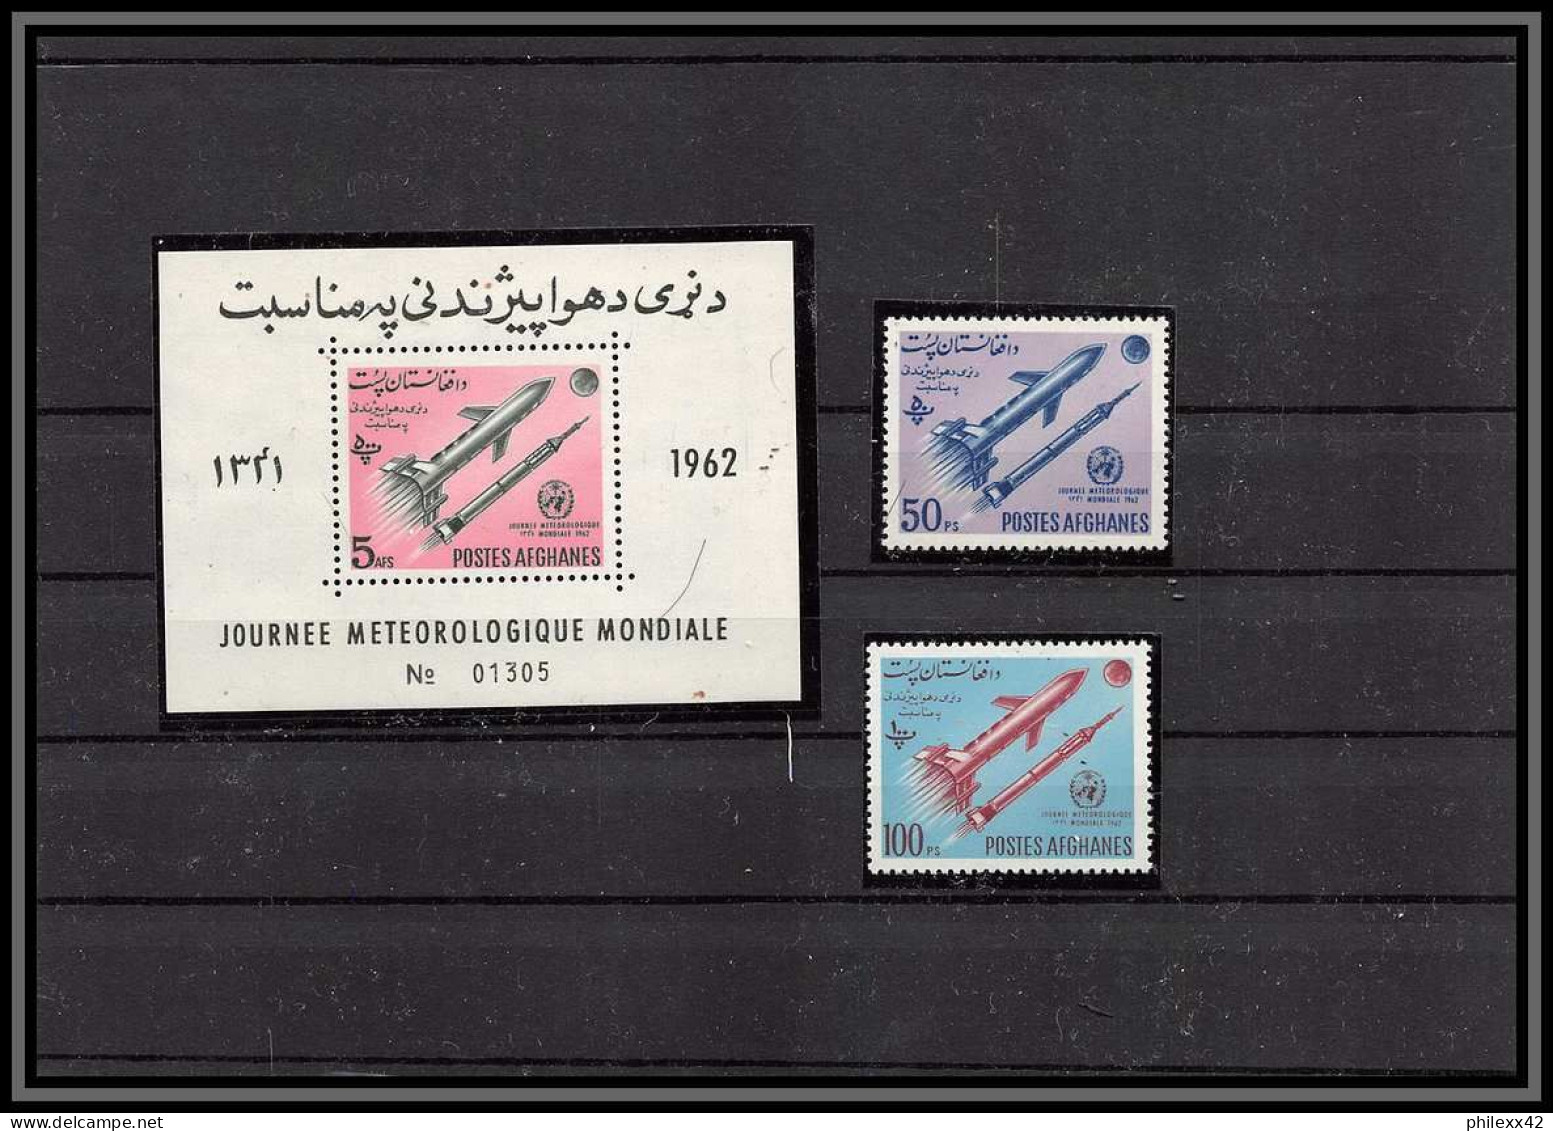 2752 Espace (space) Lettre Cover Afghanistan Postes Afghanes JOURNEE METEOROLOGIQUE MONDIALE Fdc + ** Mnh 693/69 Bloc 33 - Asie